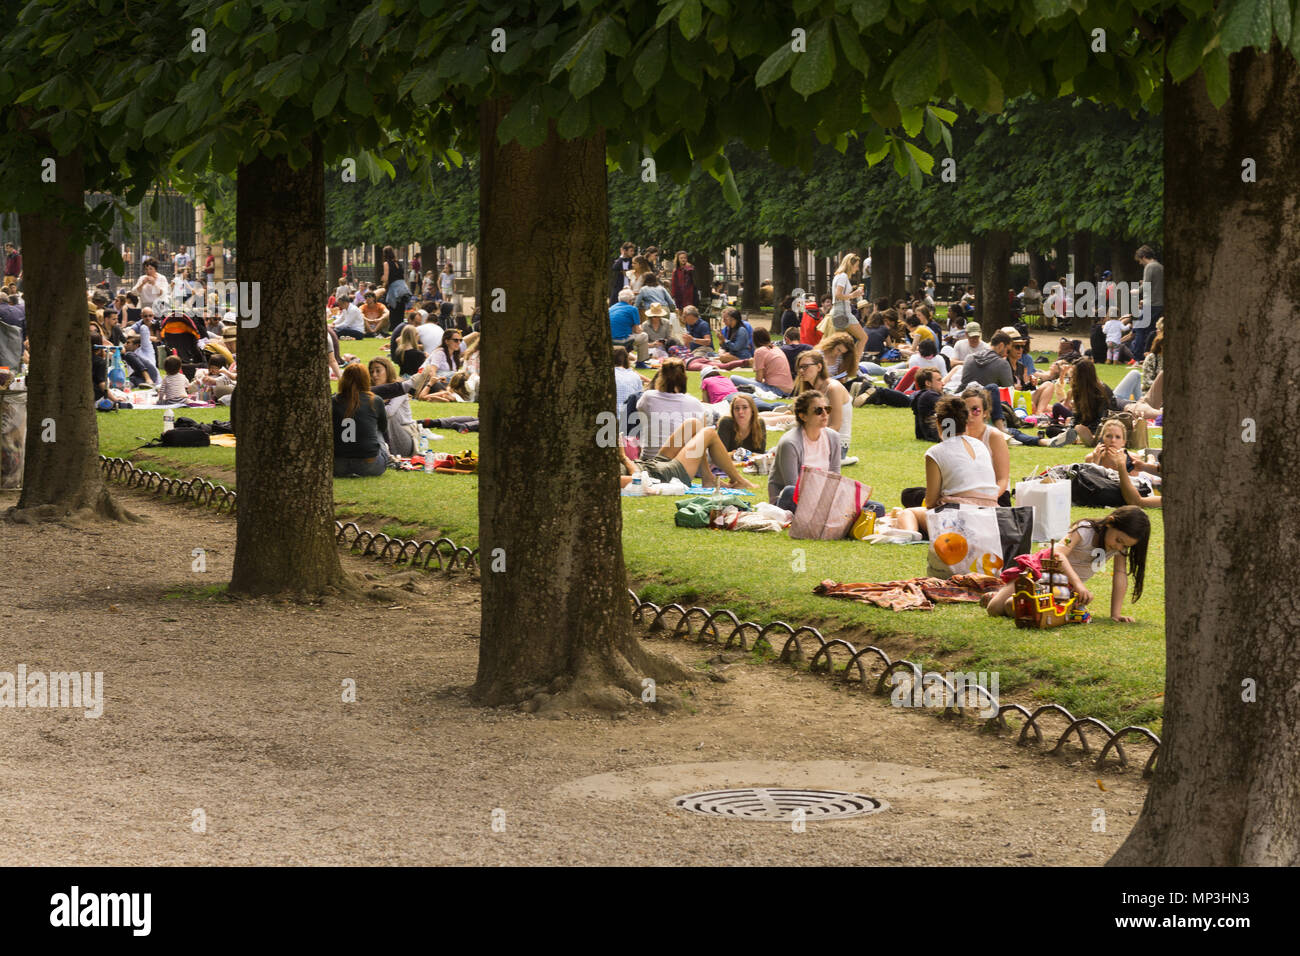 Paris Luxembourg gardens - People relaxing on green lawn at Luxembourg gardens in Paris, France, Europe. Stock Photo